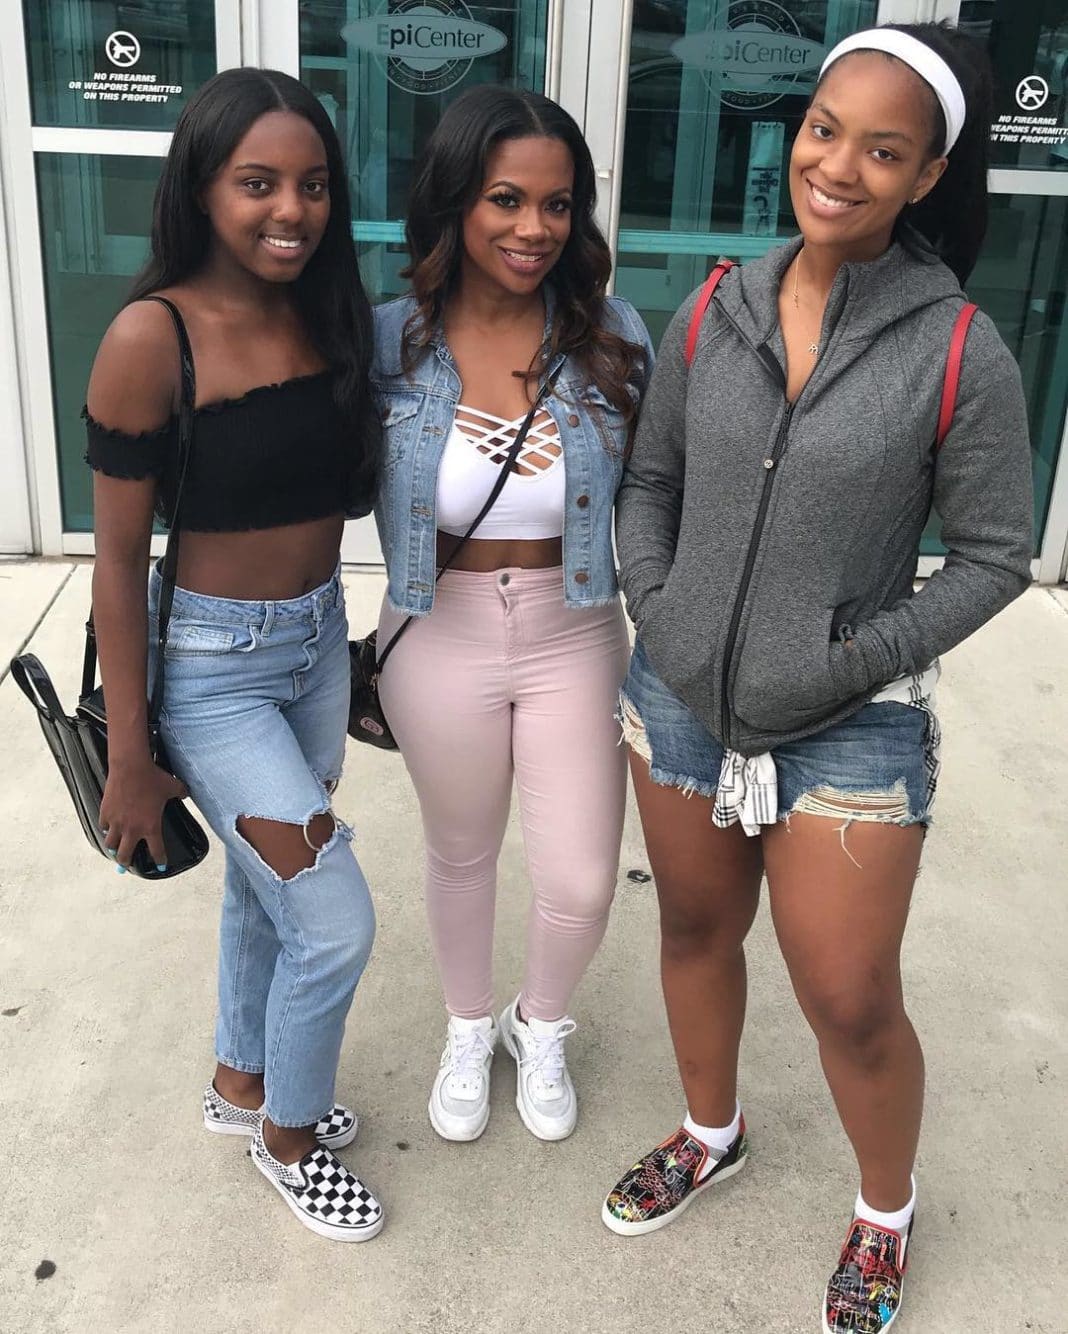 Kandi Burruss has fans believe that she's showing favoritism betwe...